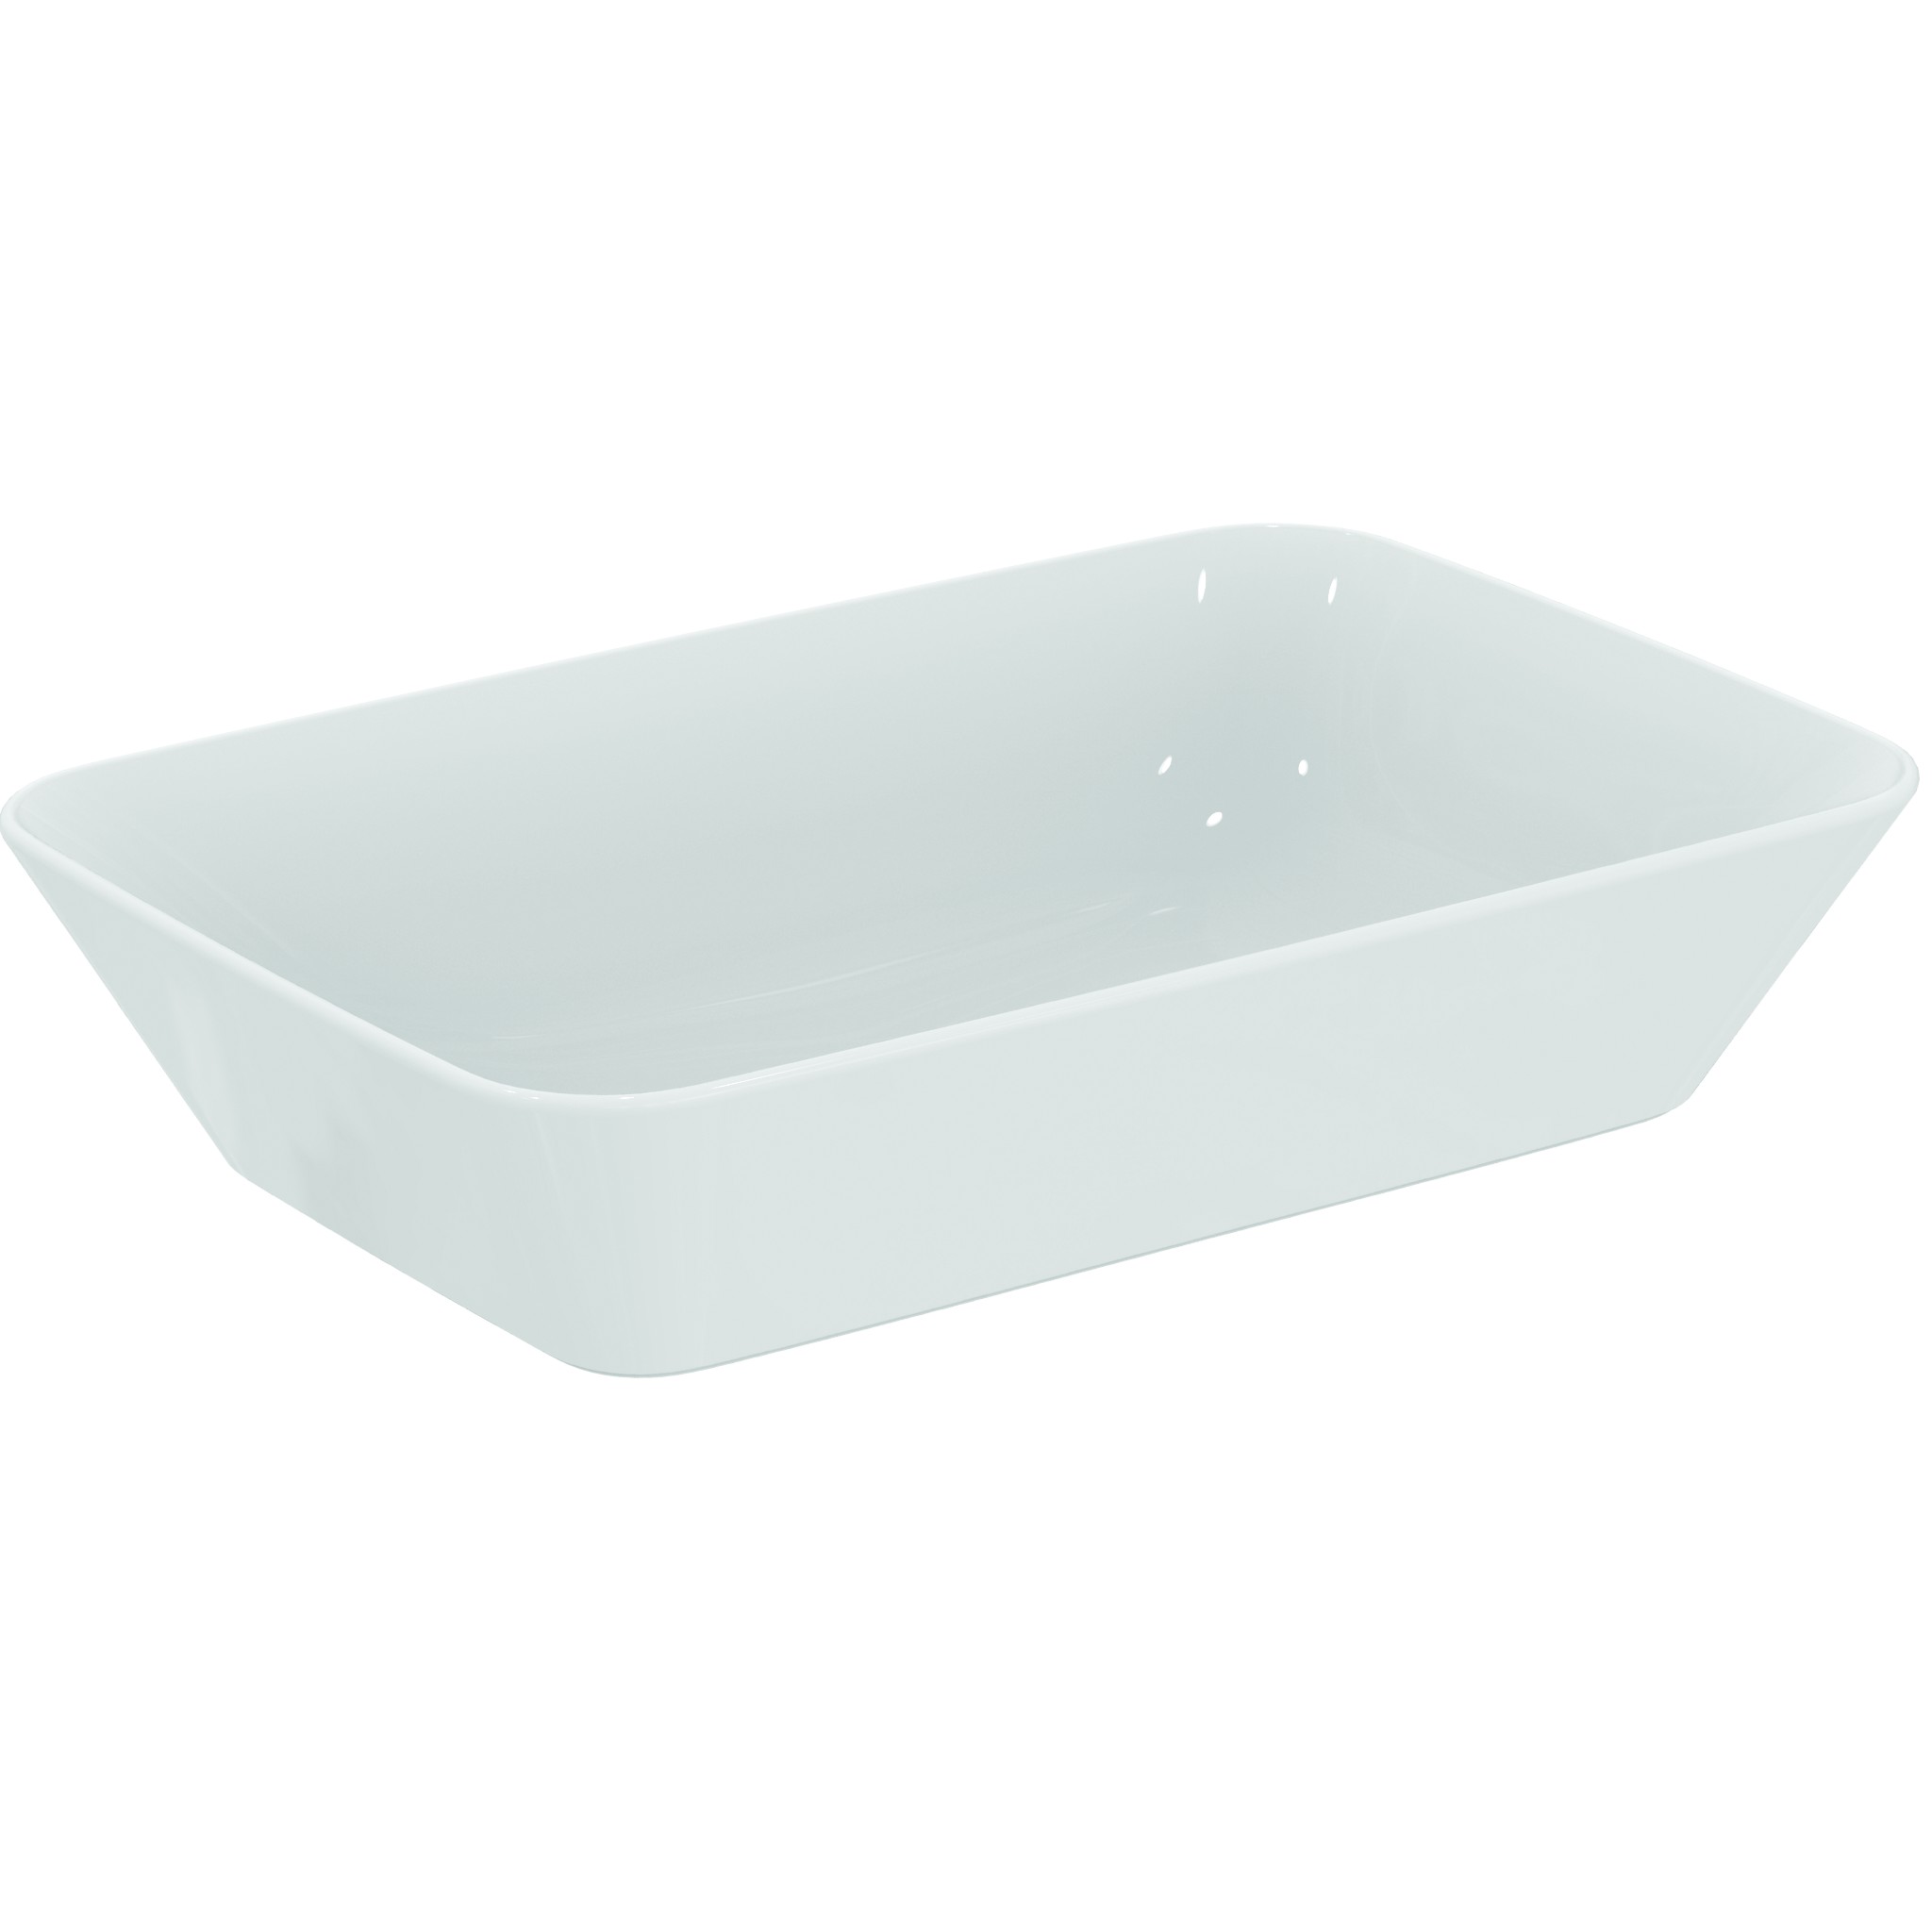 Lavoar tip bol Ideal Standard Connect Air 60x40cm montare pe blat poza